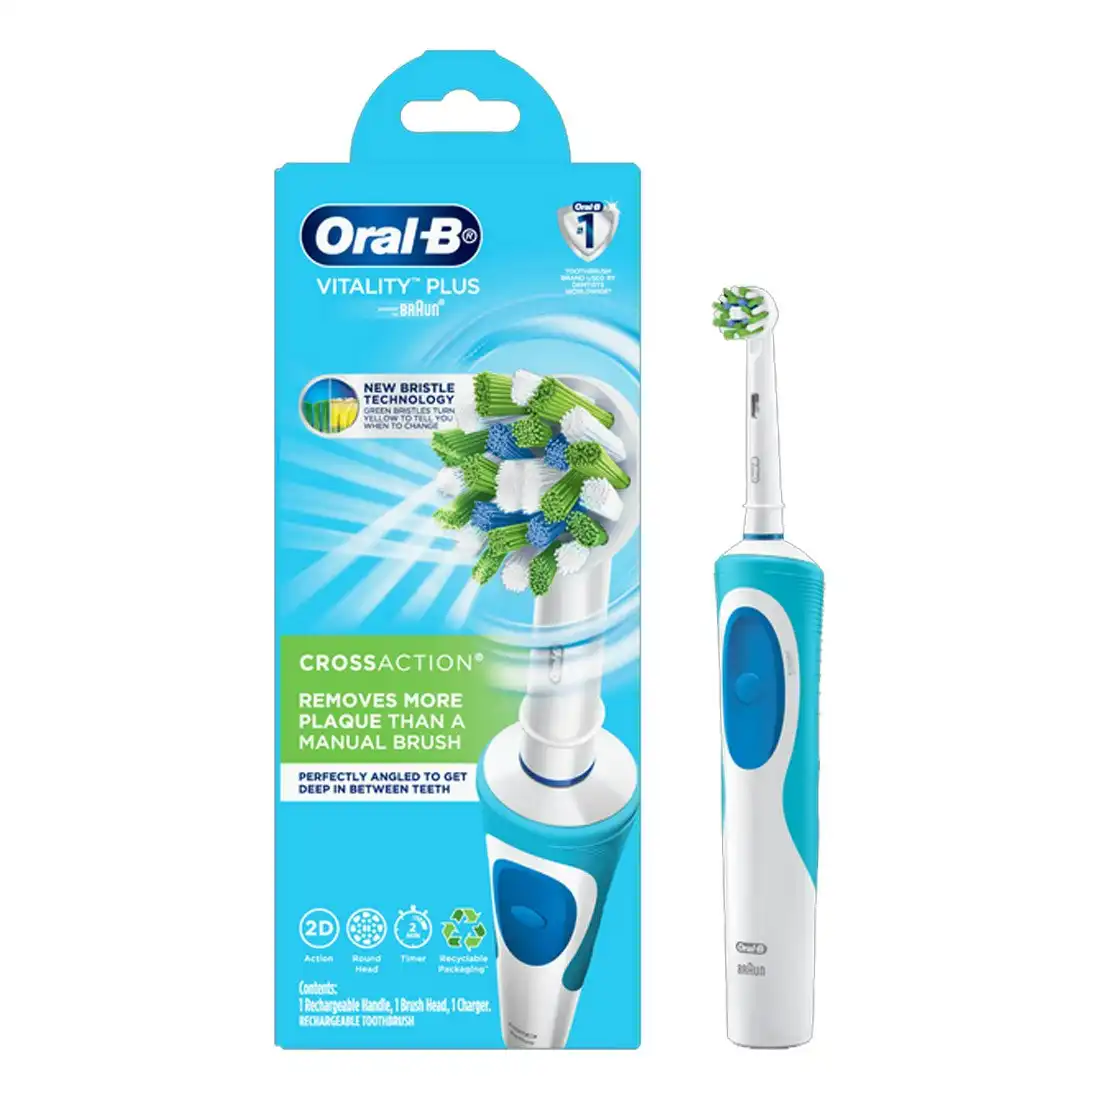 Oral-B Vitality Plus CrossAction Electric Toothbrush - Blue